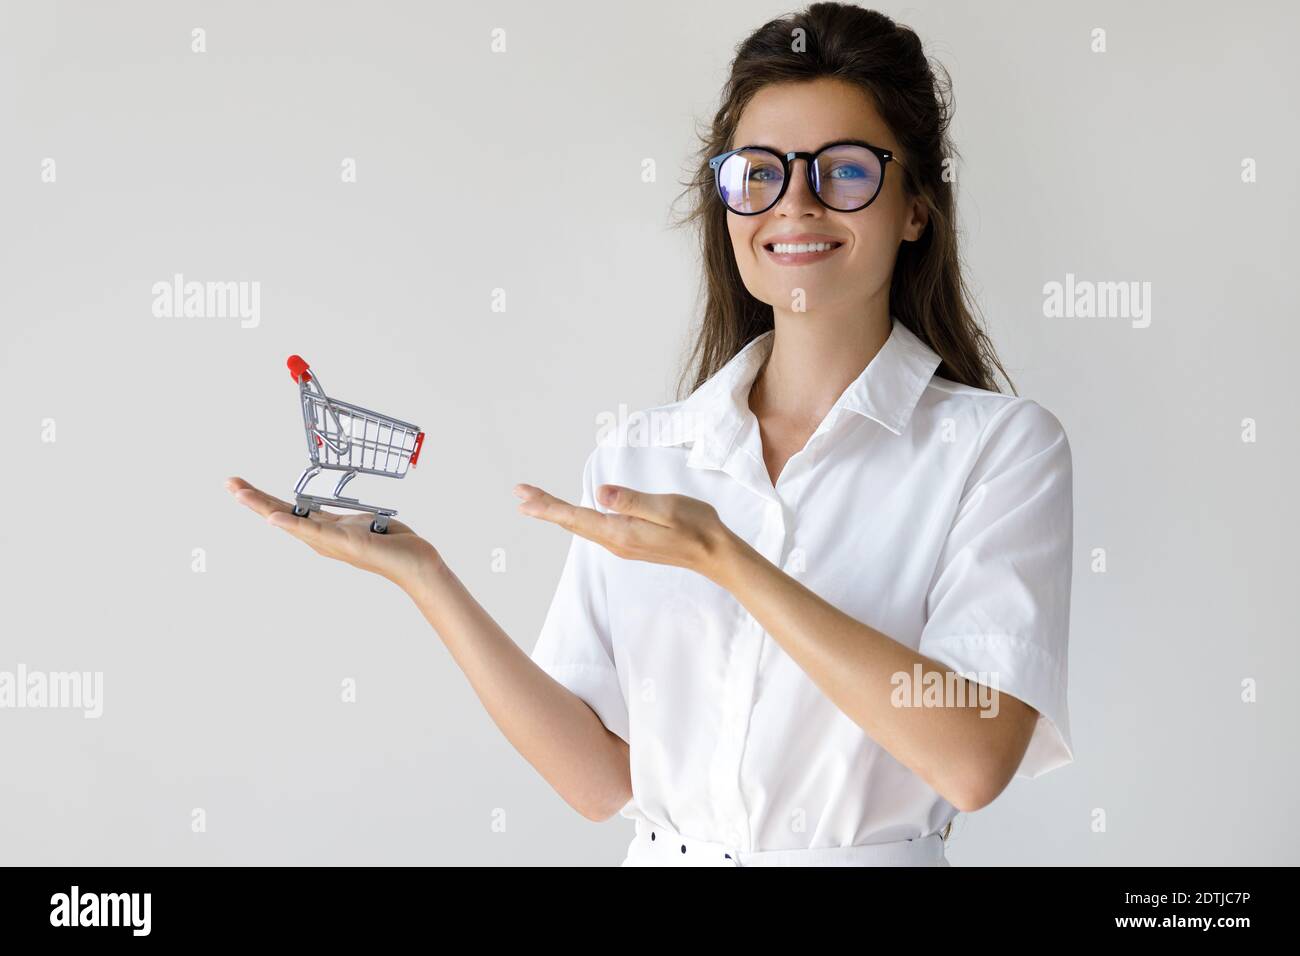 Buying and selling concept. Woman with a little shopping cart in her hand Stock Photo